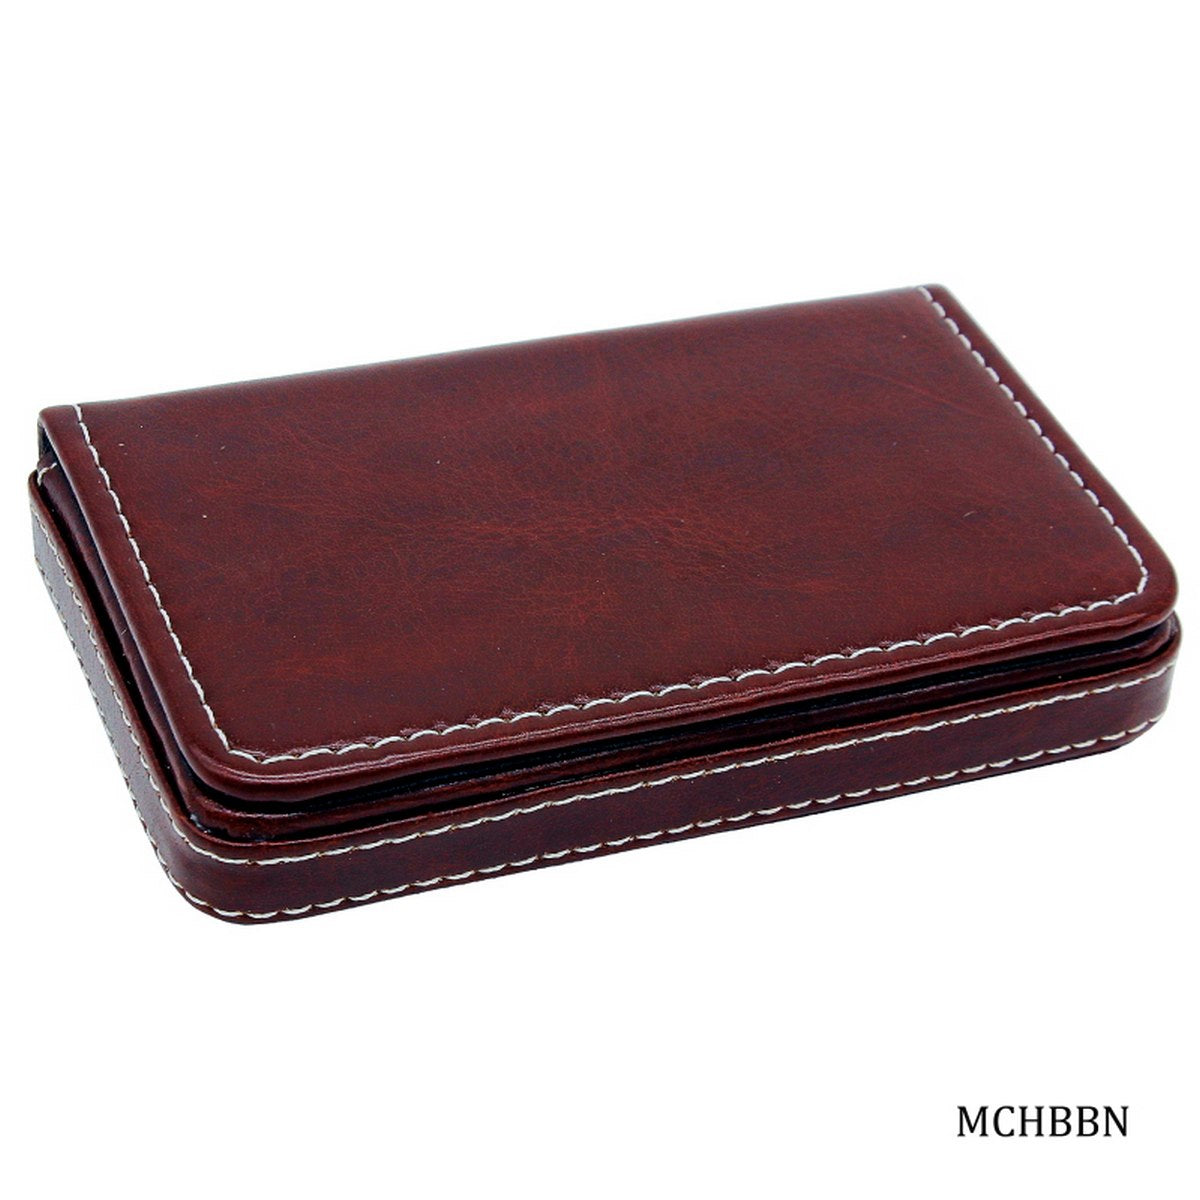 Leather Brown Business Card Holder - For Corporate Gifting, Event Gifting, Freebies, Promotions JAMCHBBN